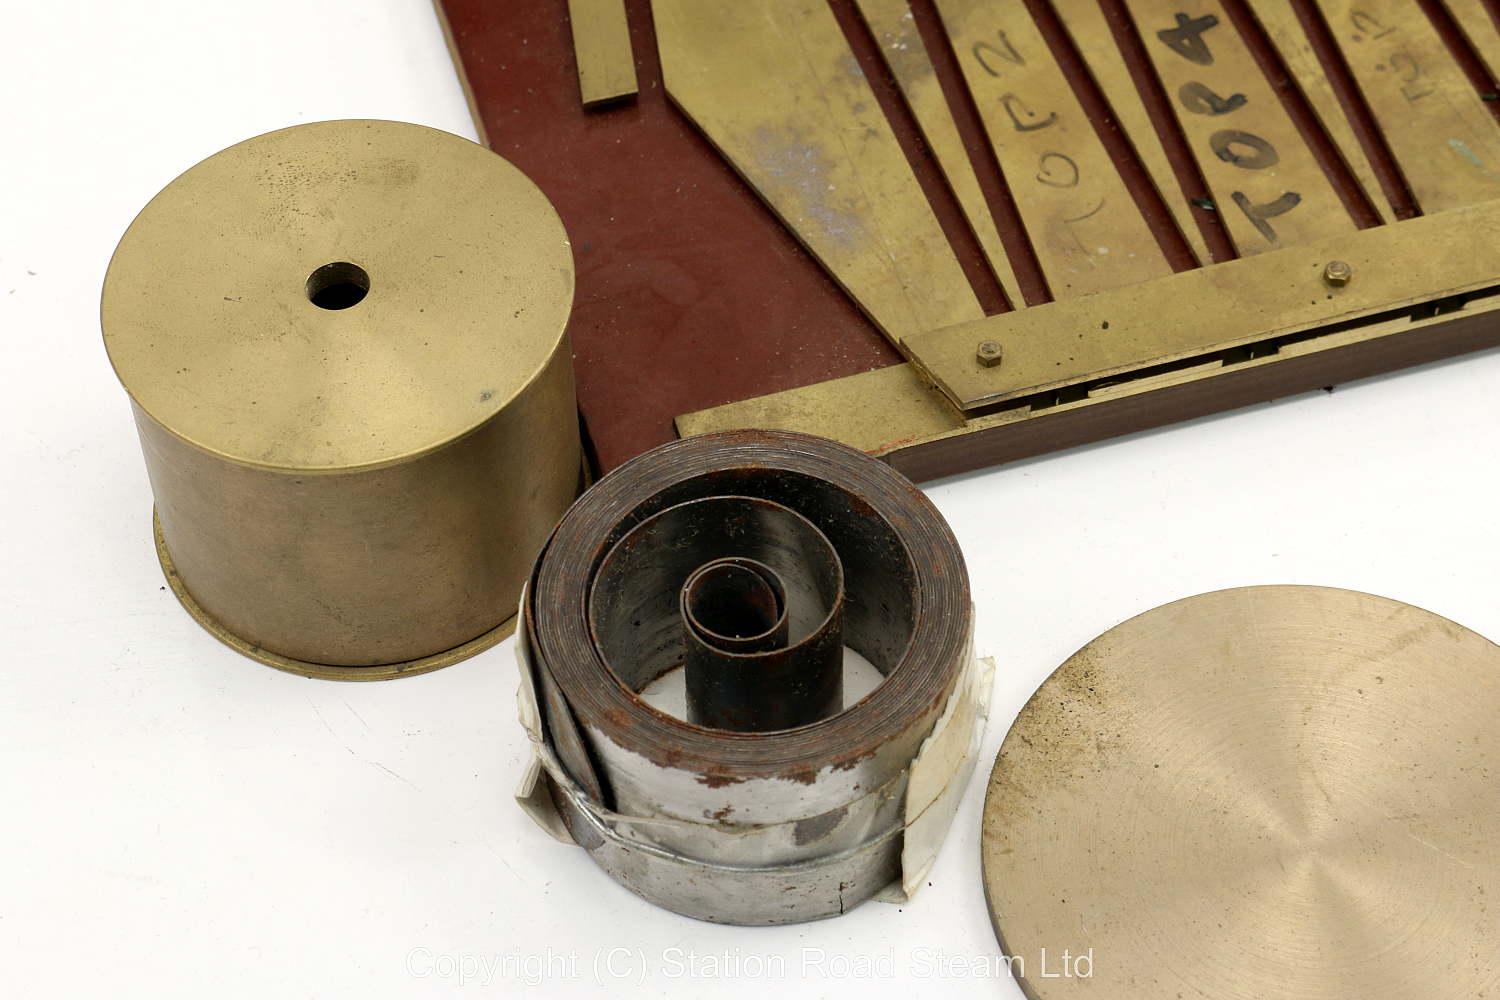 Parts & material for Congreve clock